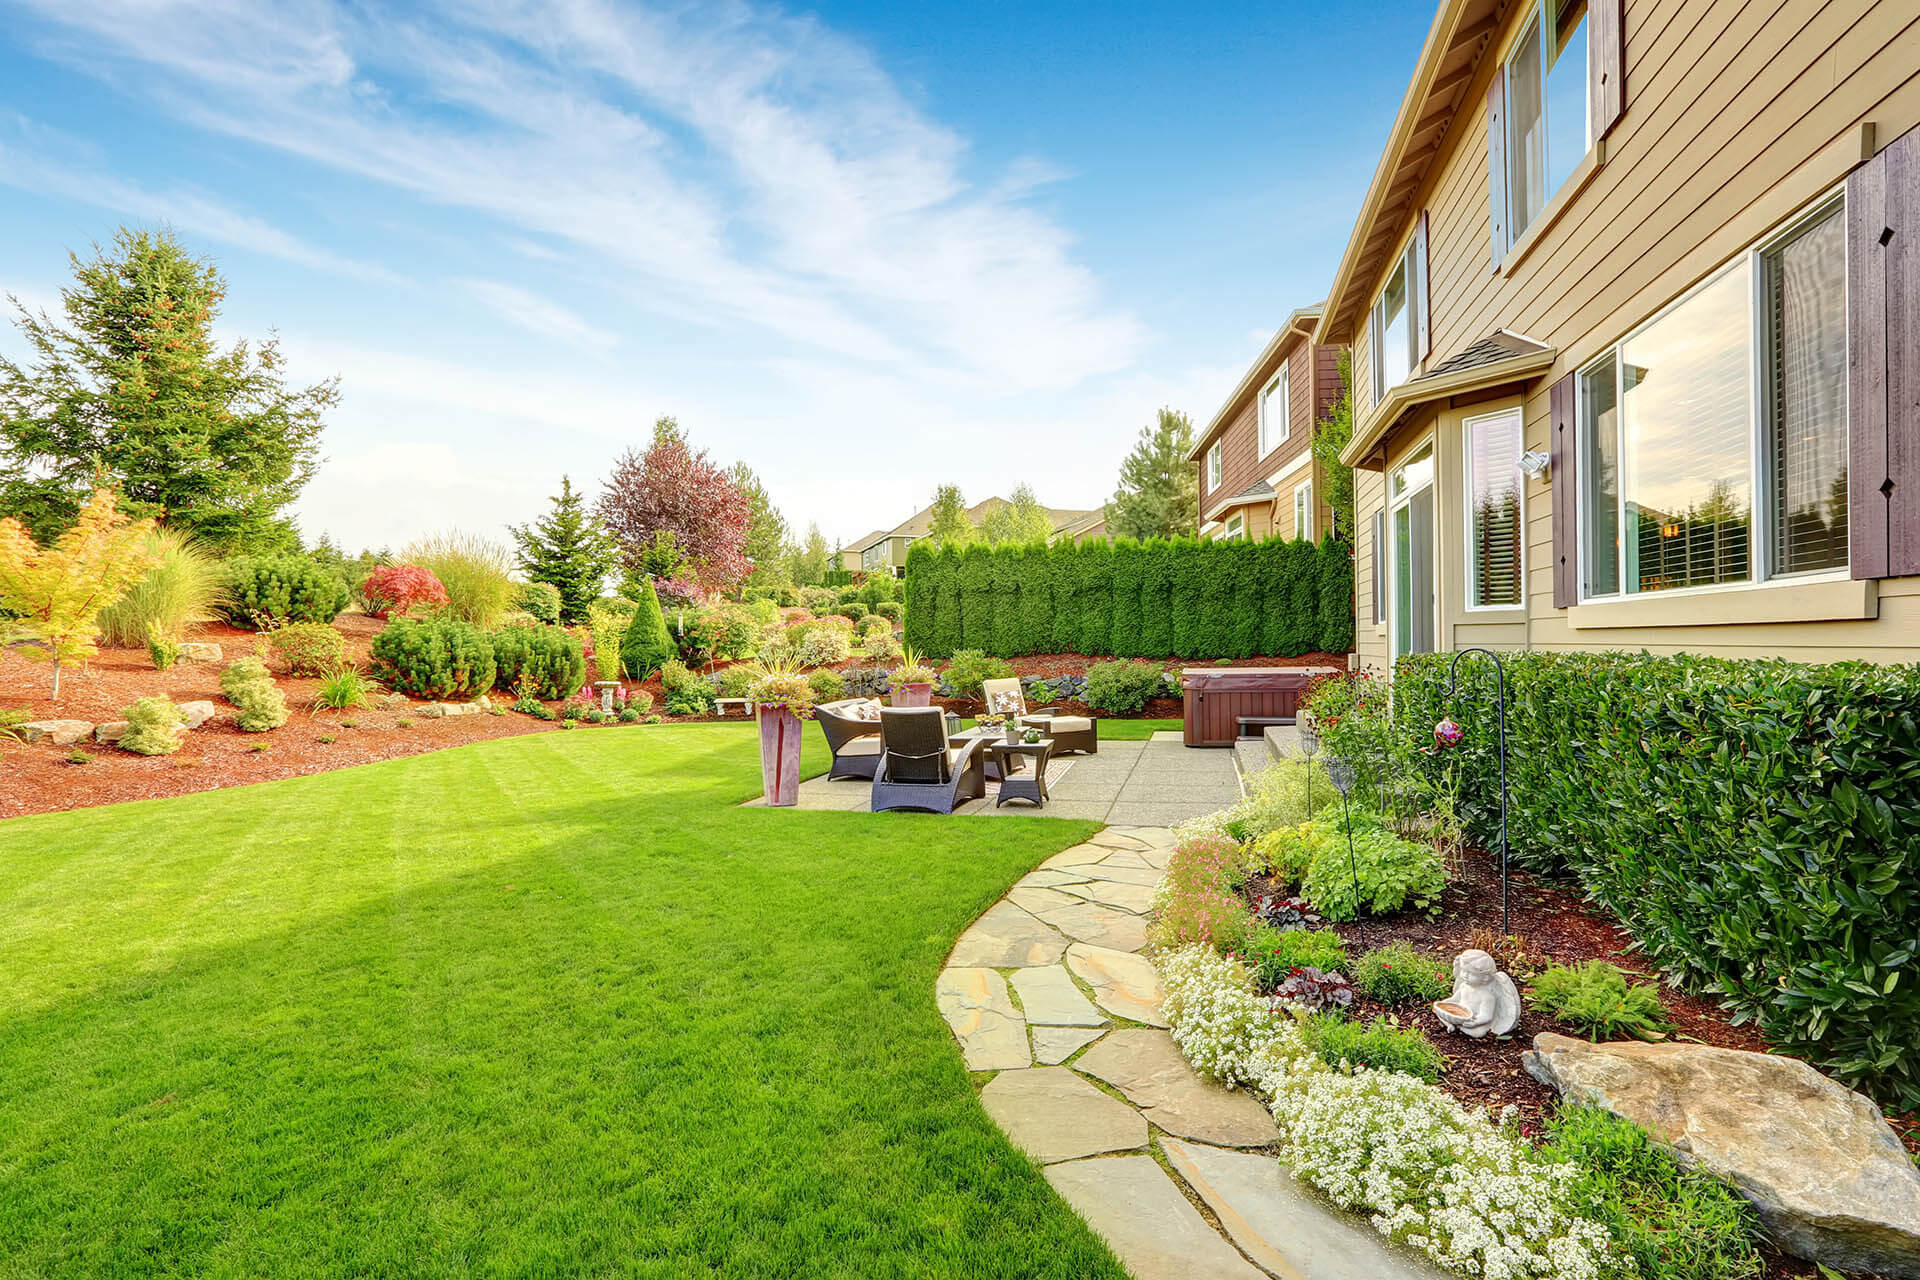 Lawn Care Maintenance Services, Professional Landscaping Services Anderson Indiana